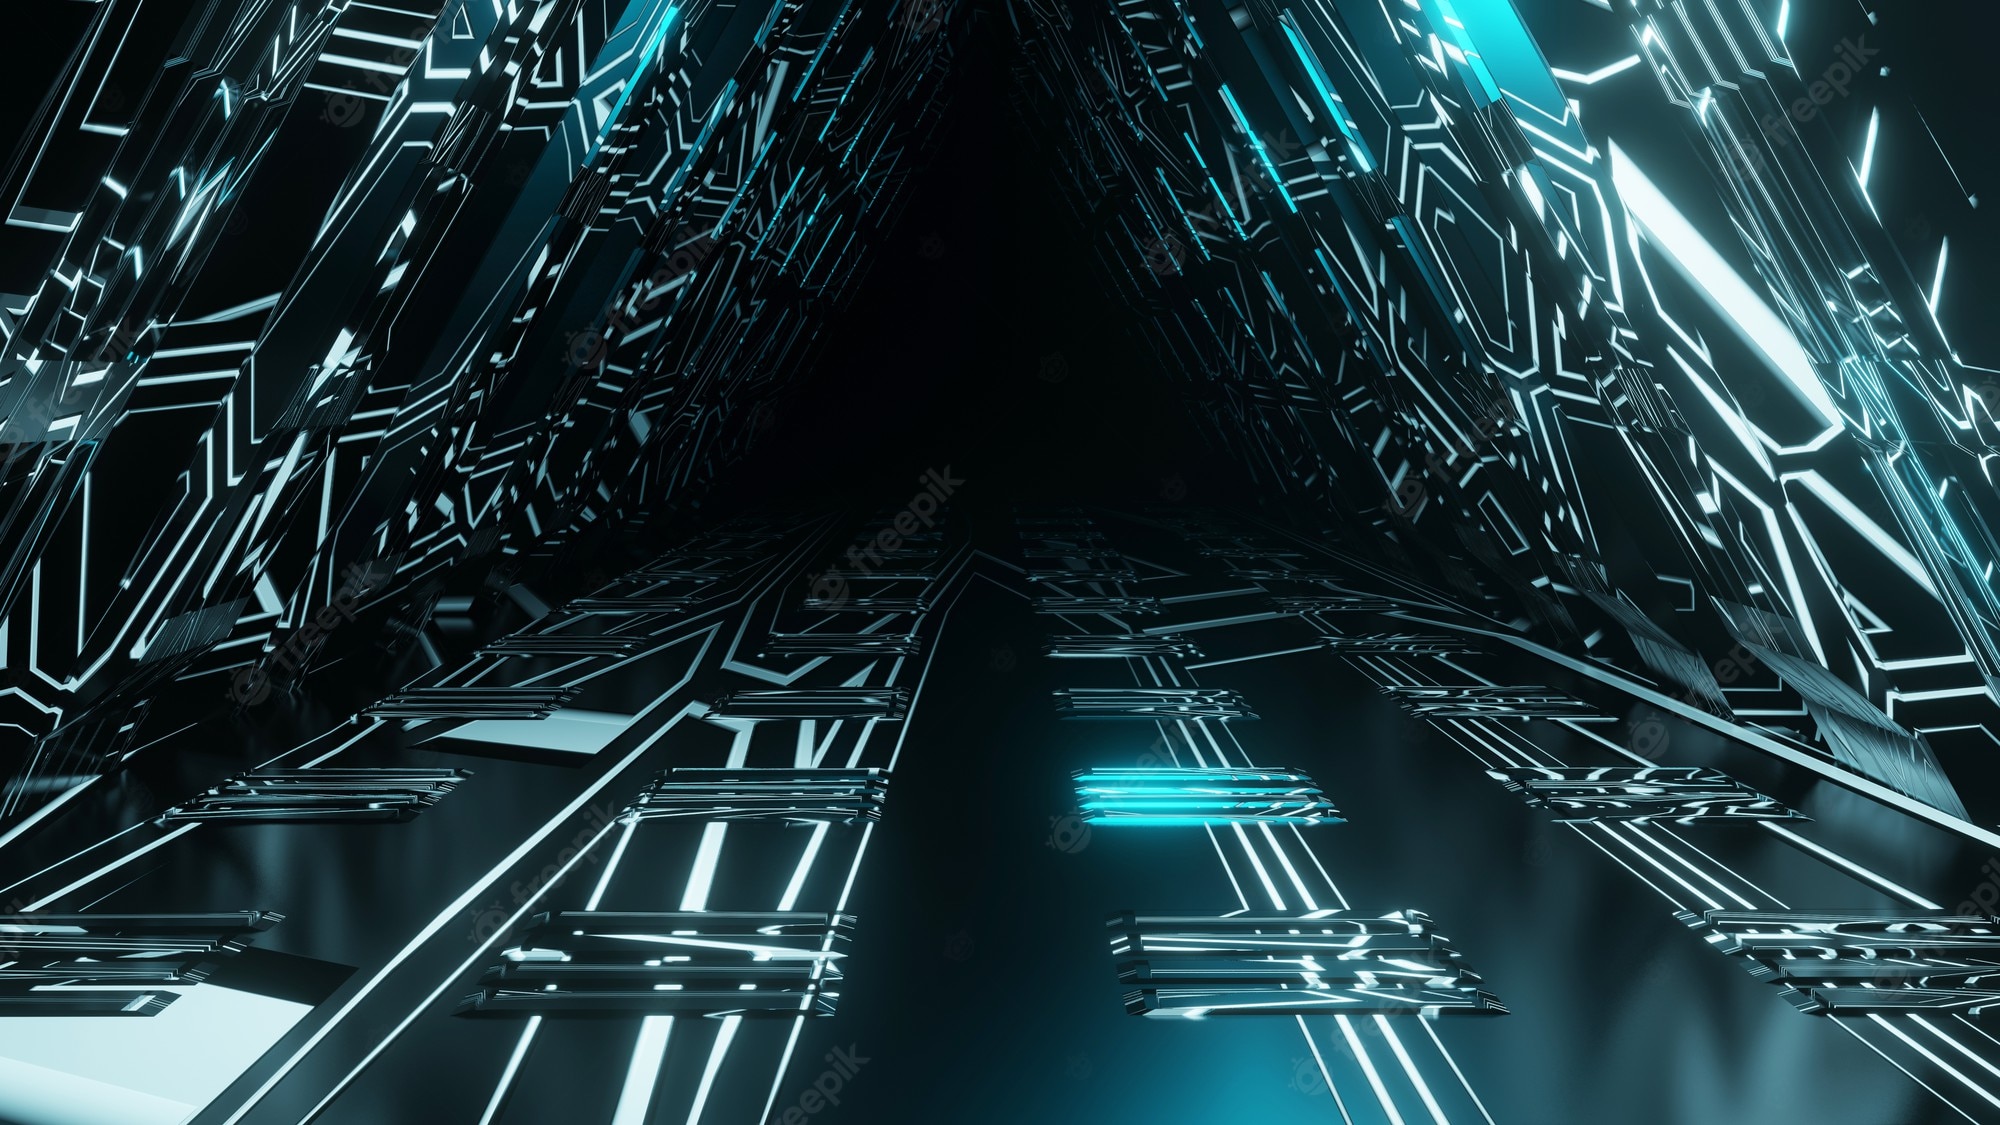 Abstract Sci Fi Wallpapers